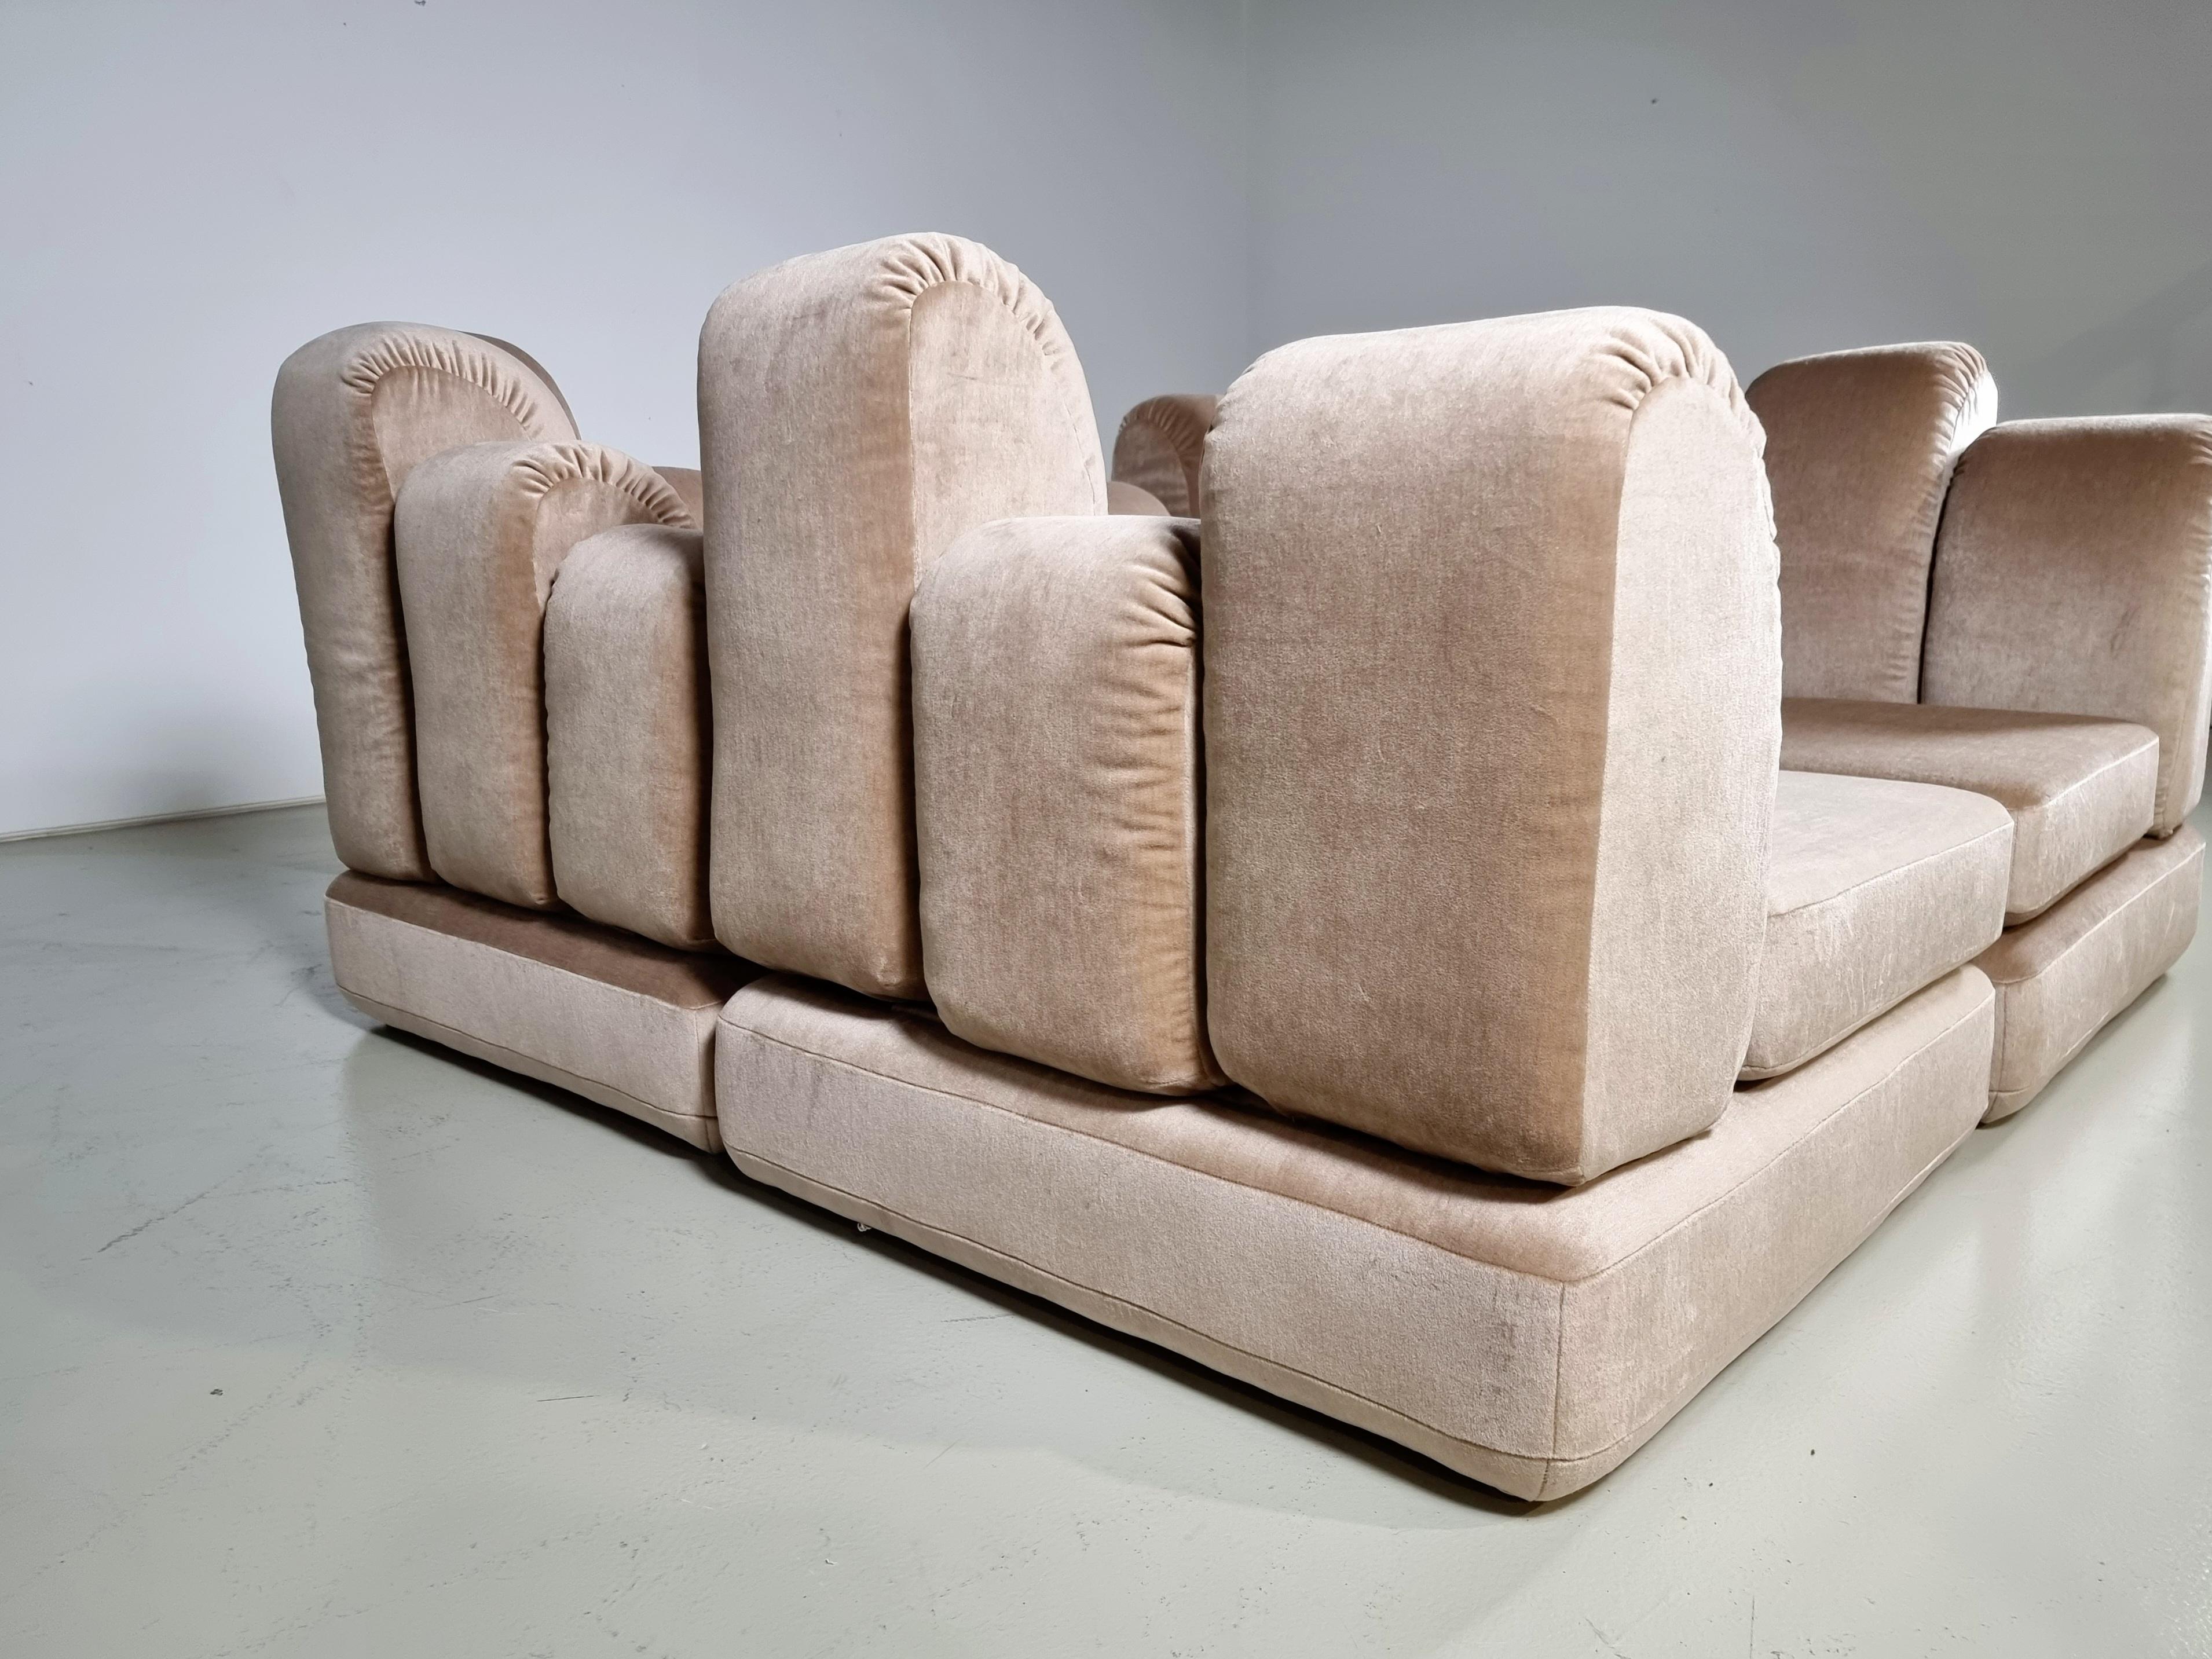 Hans Hopfer 'Dromadaire' Sectional Sofa in mohair wool, Roche Bobois, 1970 In Excellent Condition For Sale In amstelveen, NL